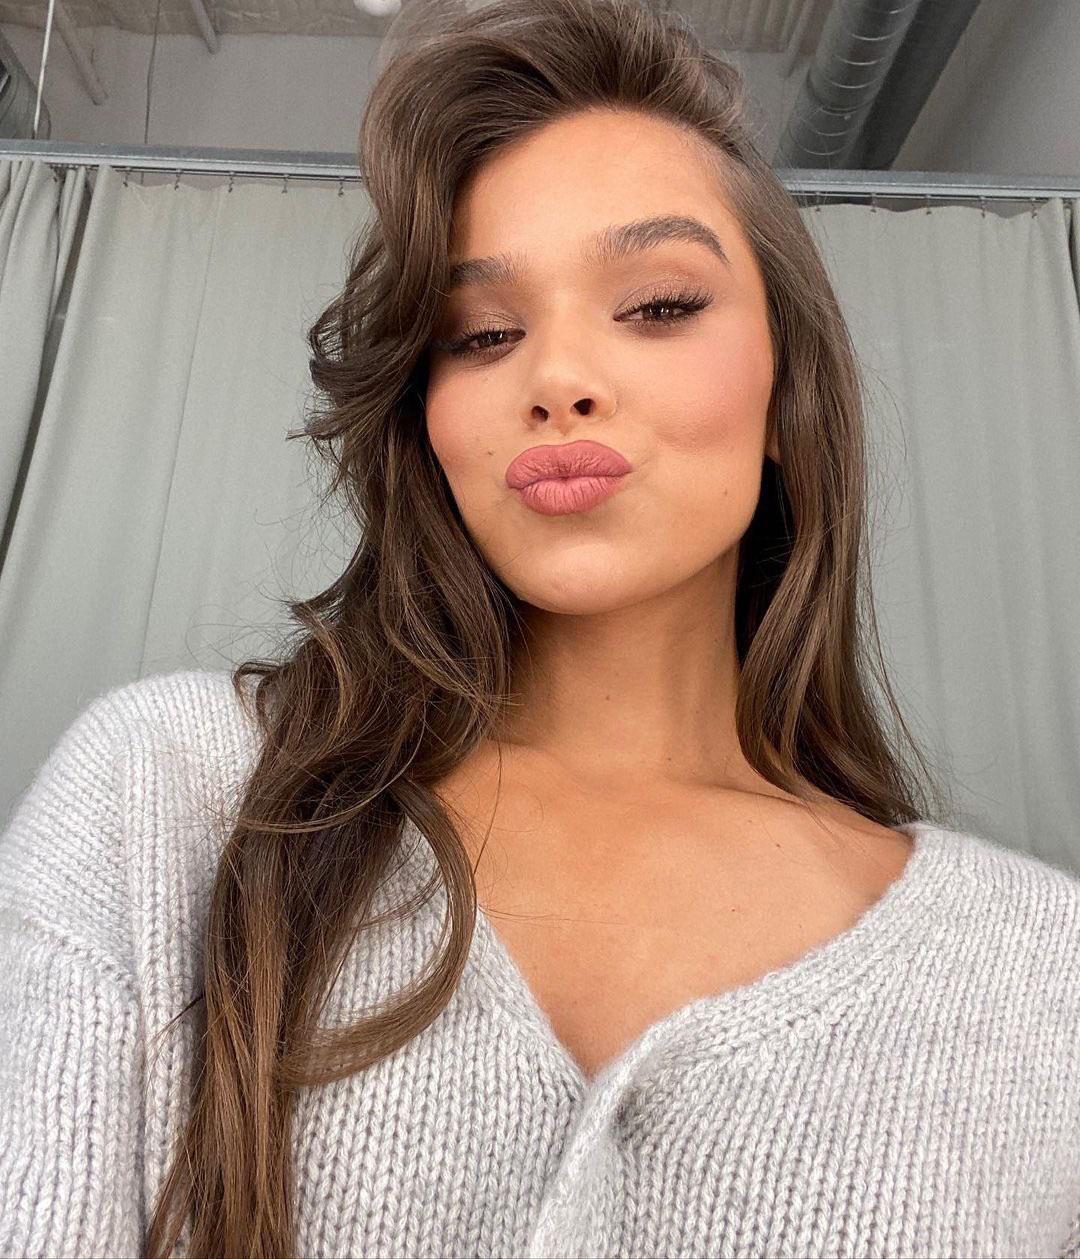 Hailee Steinfeld is gonna make my cock explode